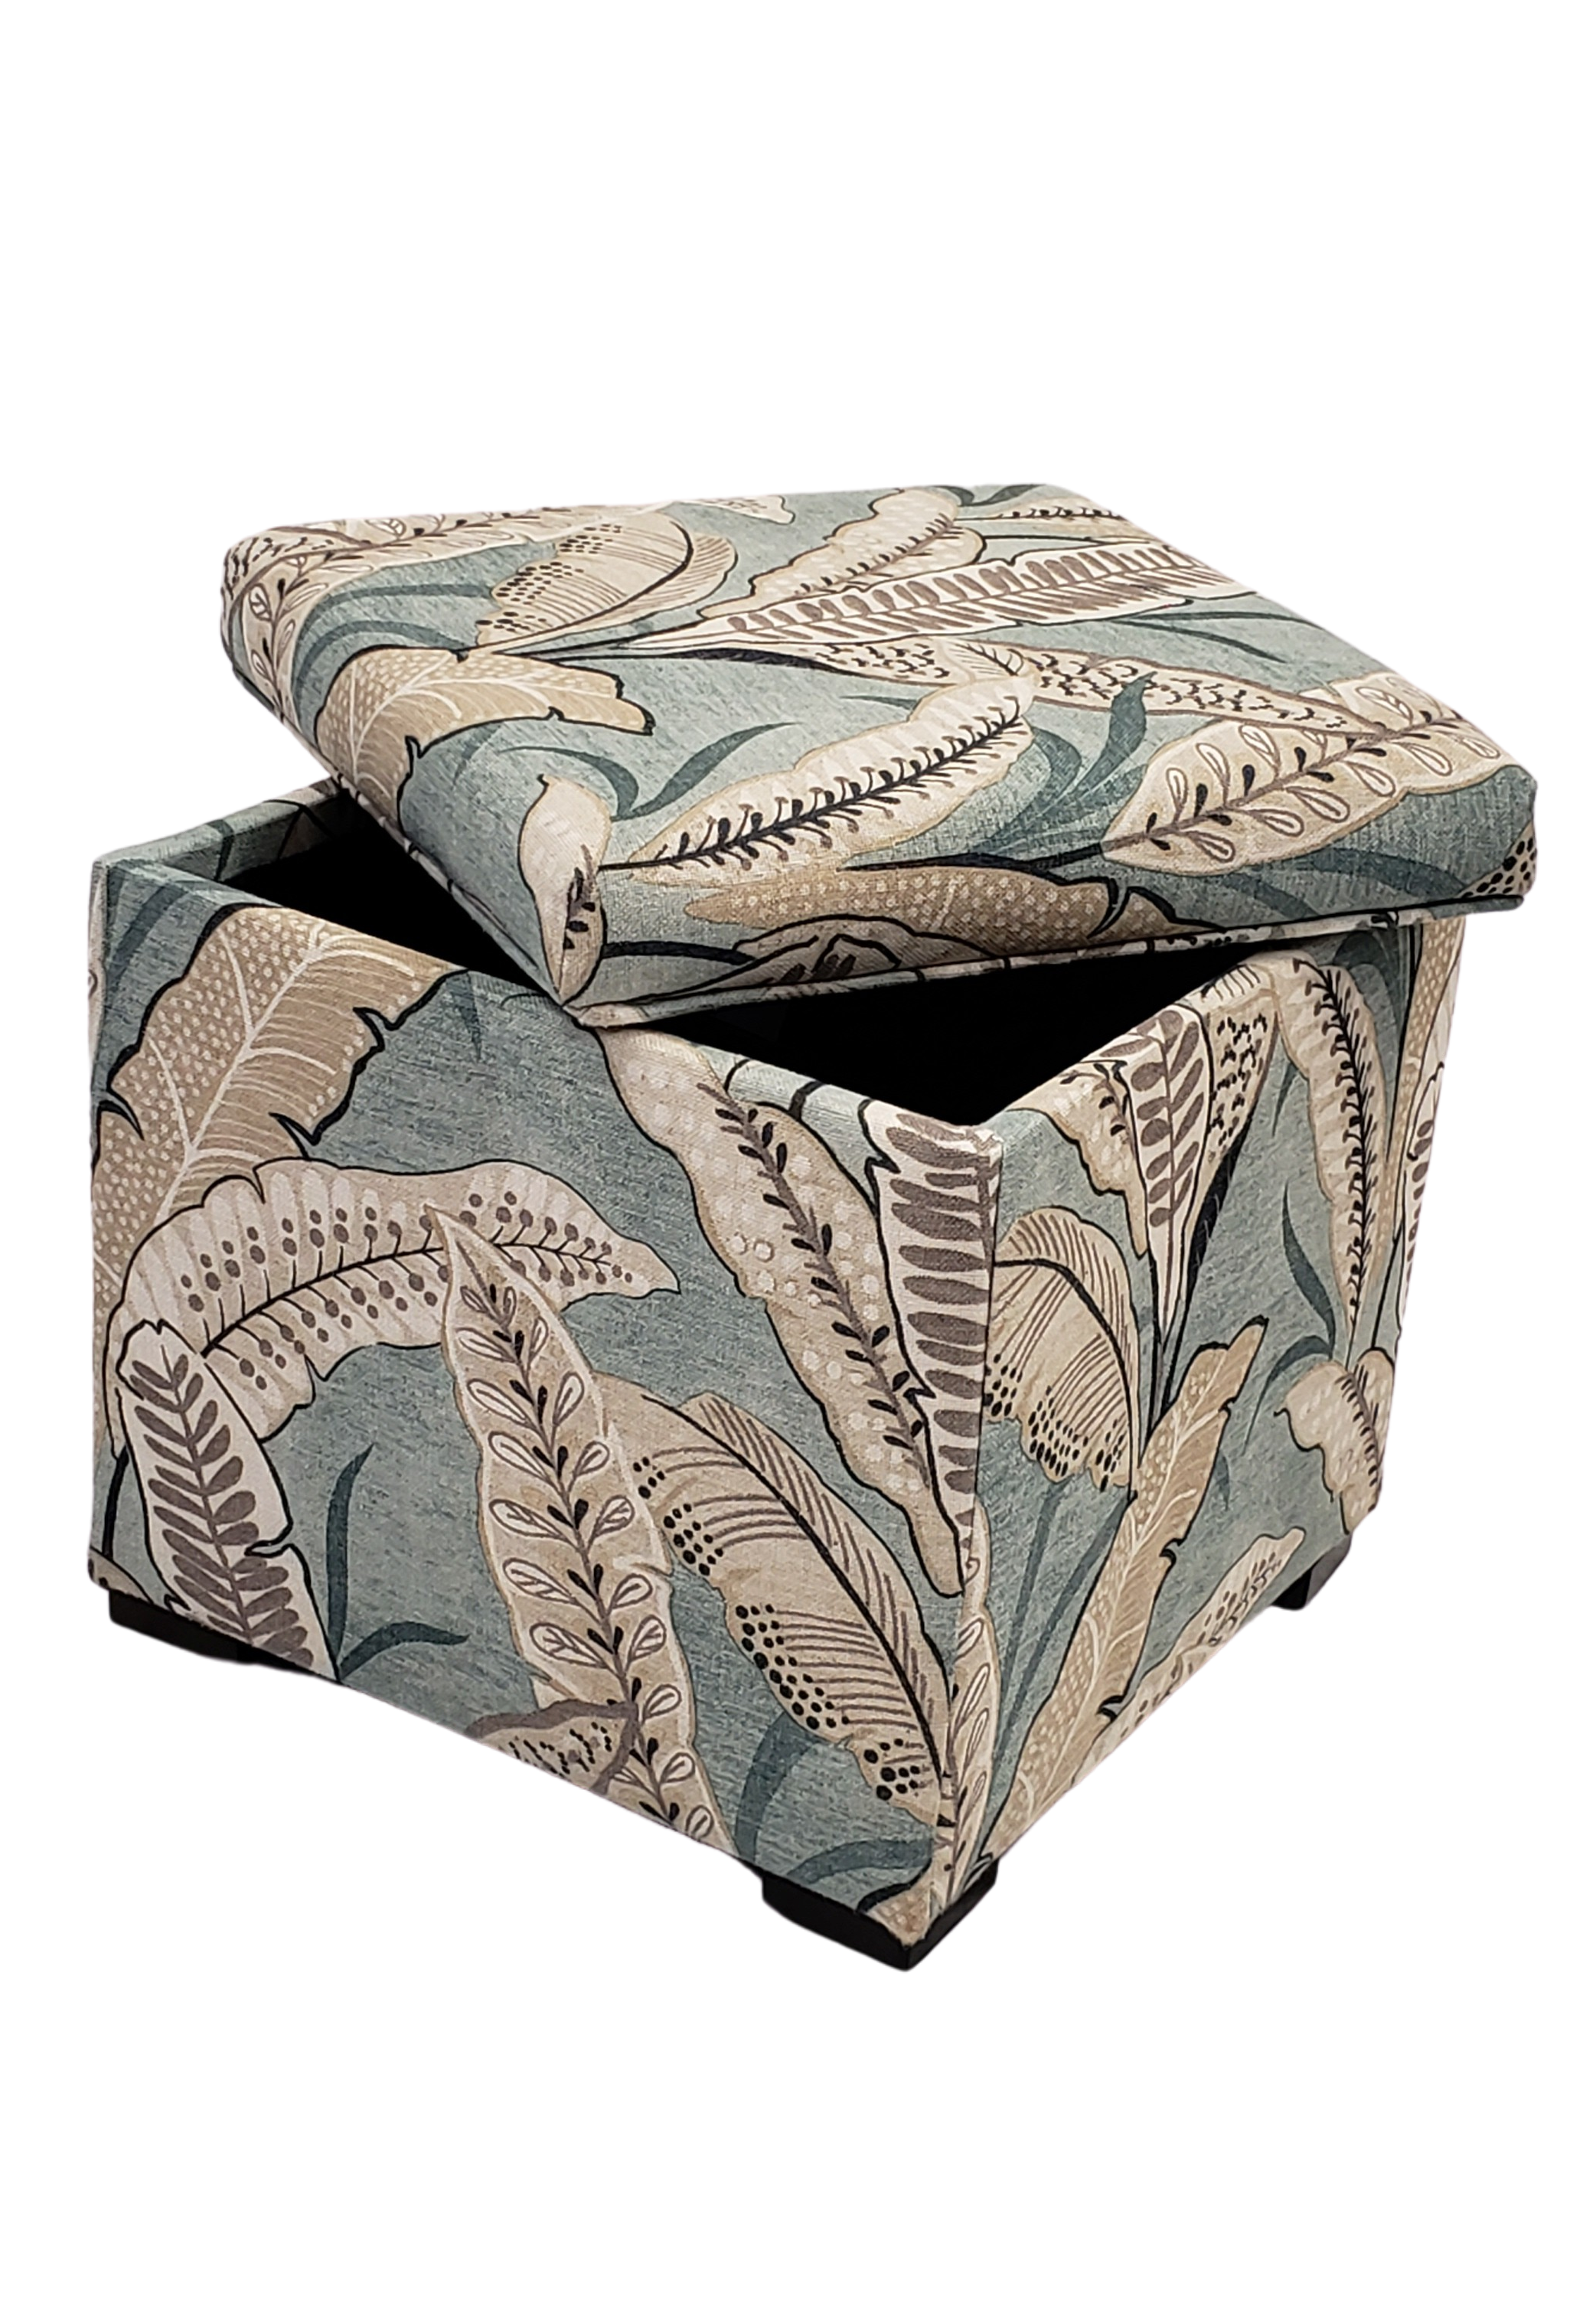 Cube Storage Ottoman - Additional Patterns Available